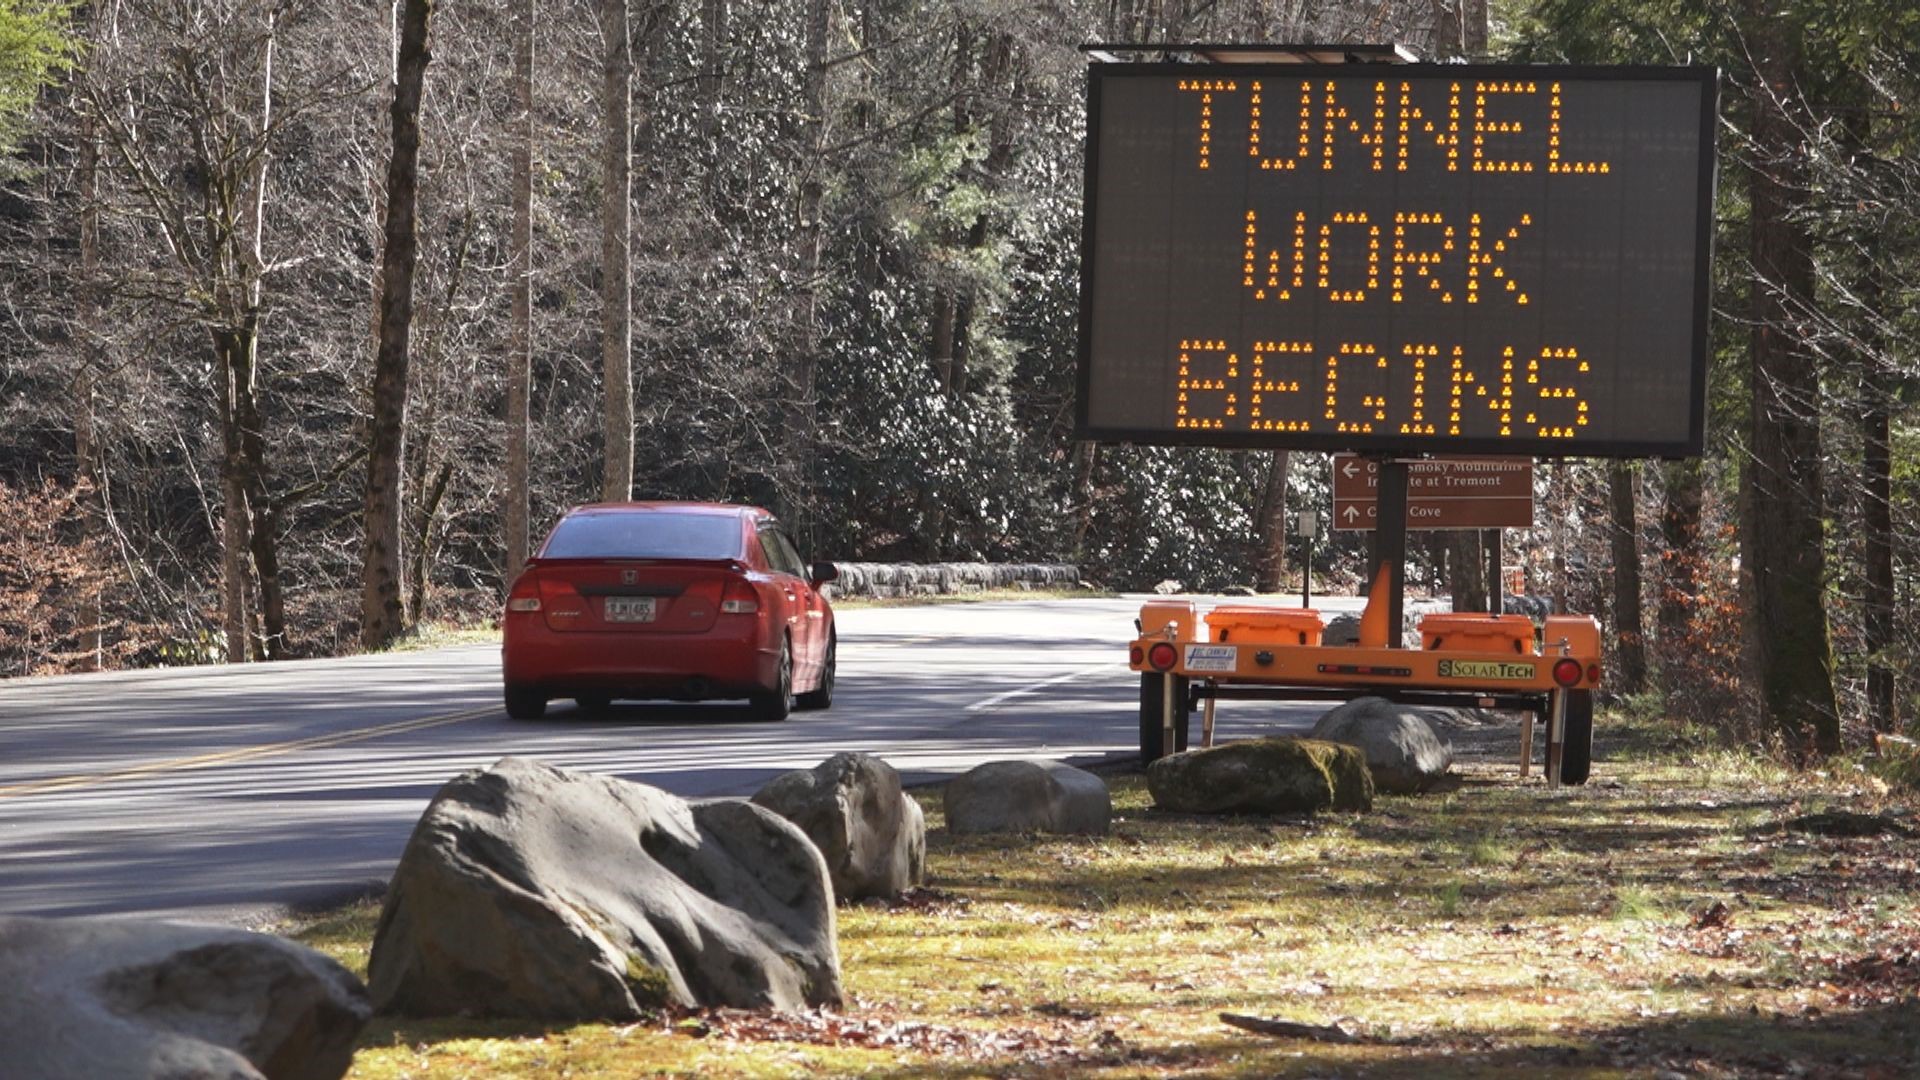 The rush is on for visitors and photographers to make final trips to Cades Cove before Jan. 6, 2020, when the road will close for tunnel repairs through February.